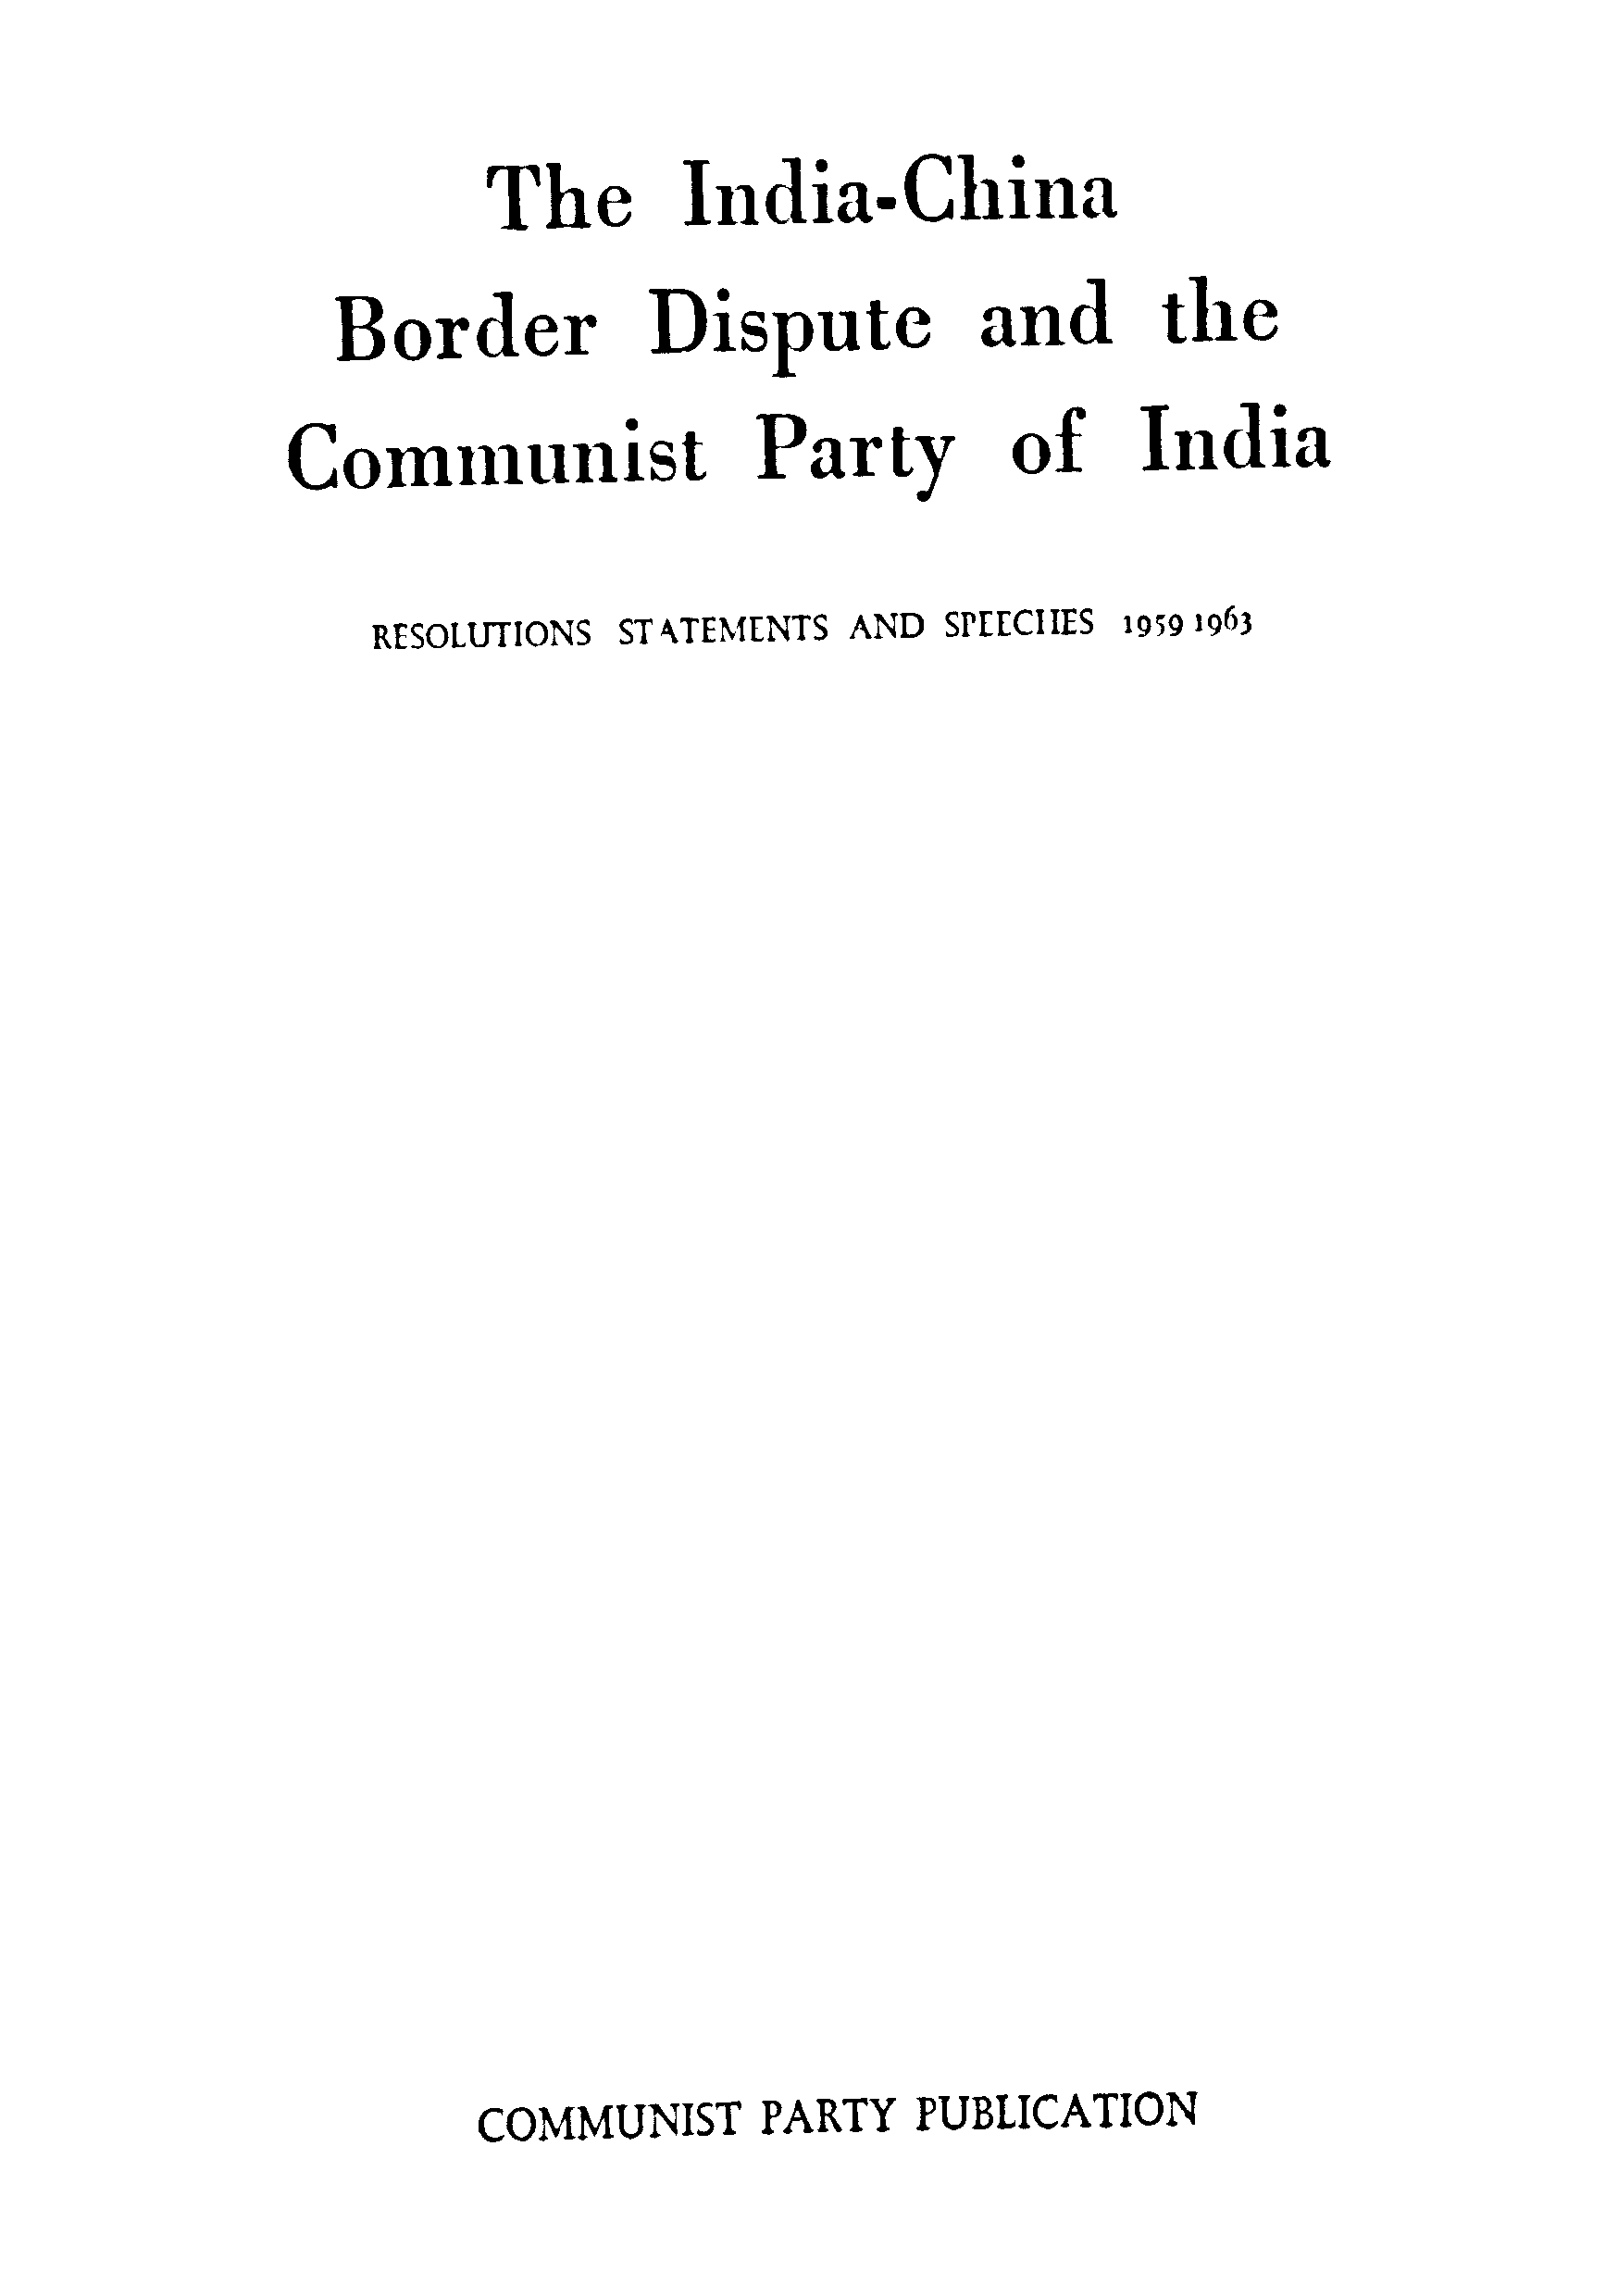 THE  INDIA-CHINA Border Dispute and the Communist Party of India